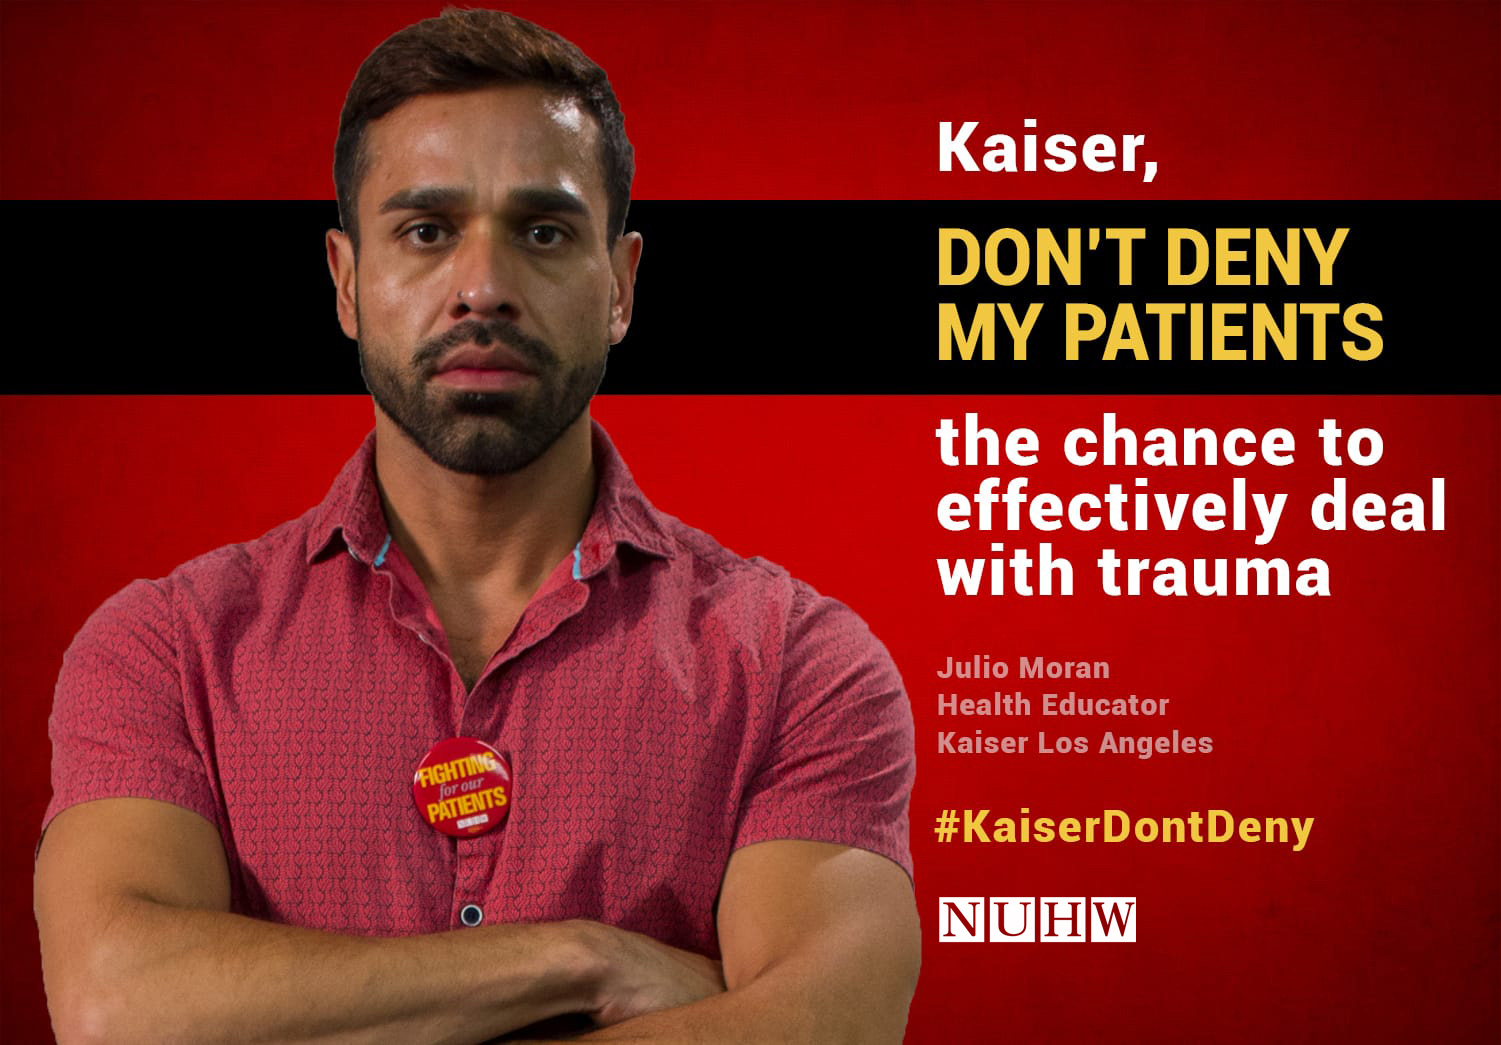 Kaiser, don't deny my patients the chance to effectively deal with trauma. -- Julio Moran, Health Educator, Kaiser Los Angeles